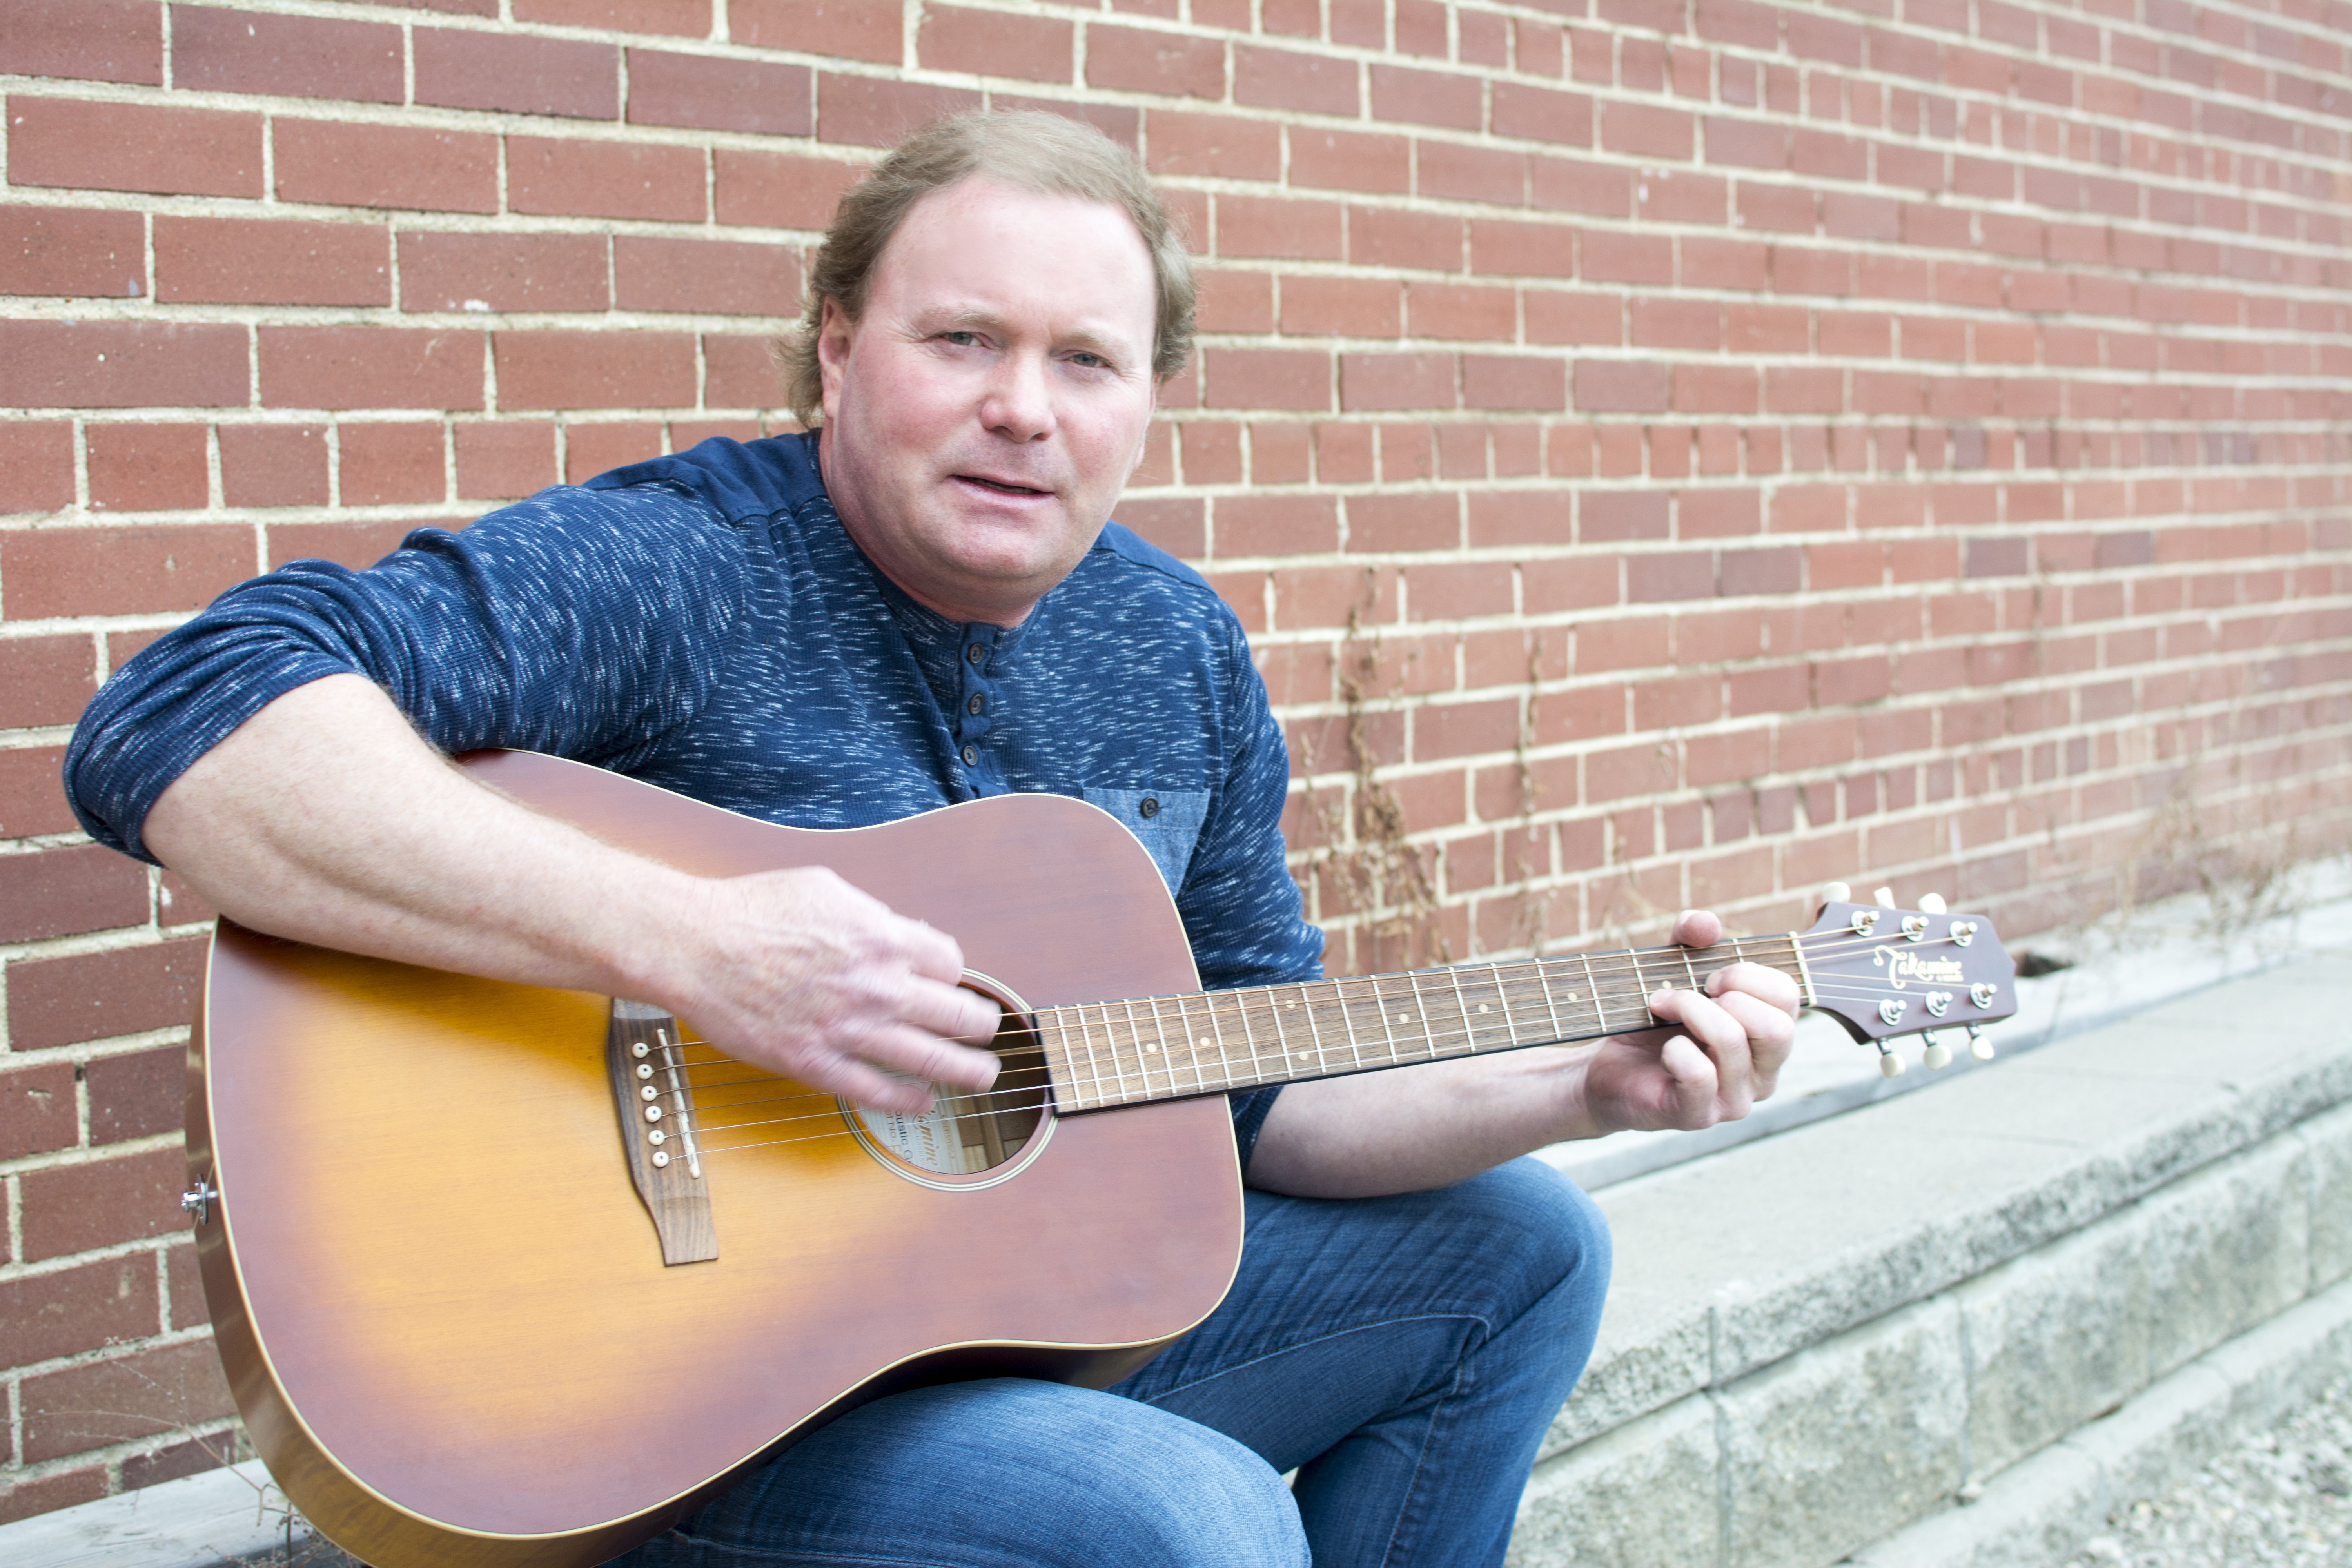 LOCAL TALENT – Singer James Andruski is looking forward to introducing his music in coming shows.